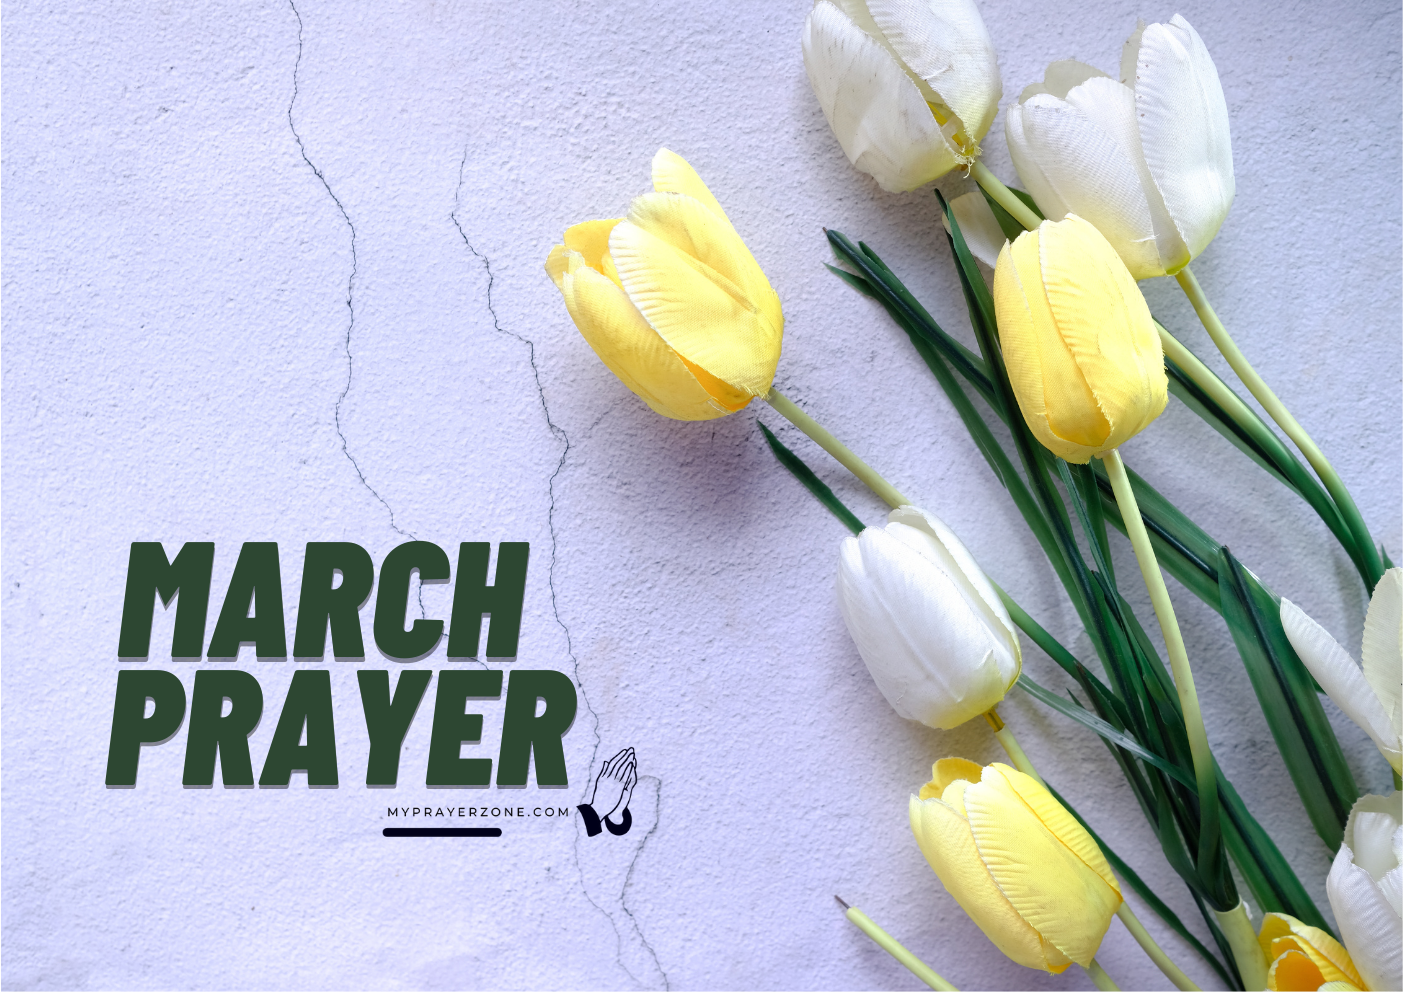 PRAYER POINTS FOR THE MONTH OF MARCH